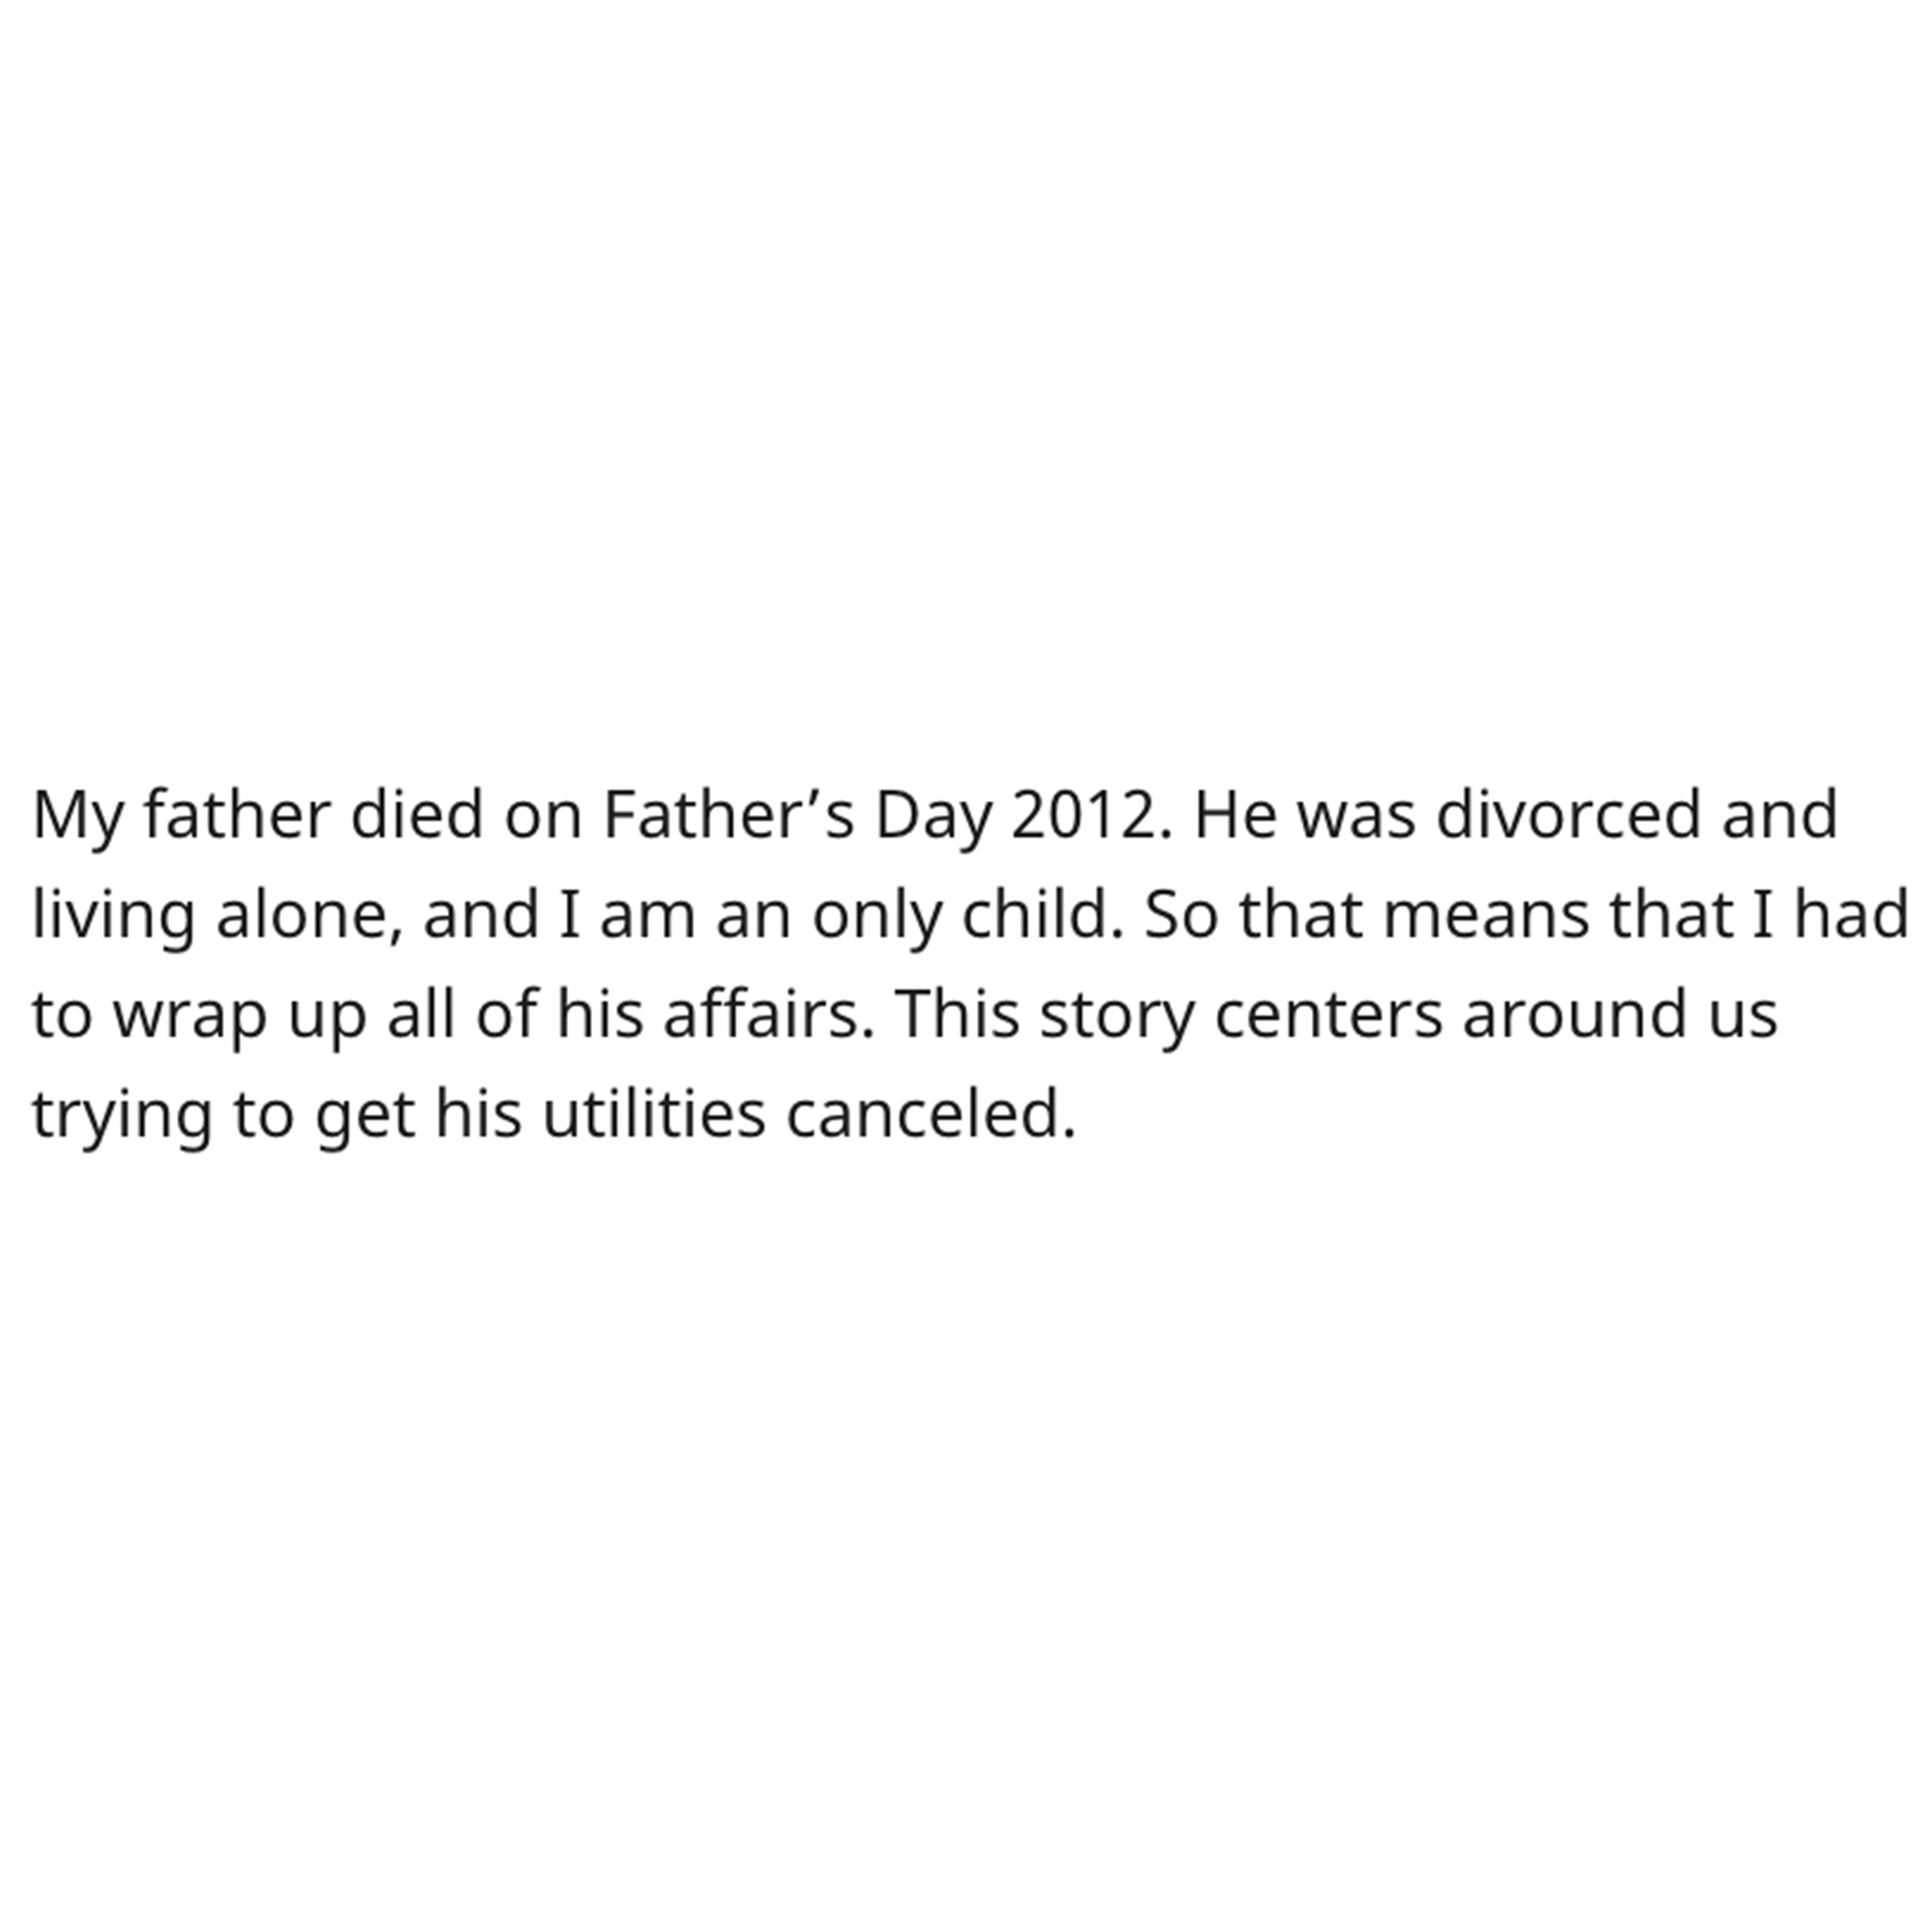 Dead Dad revenge story - funny islamic exam memes - My father died on Father's Day 2012. He was divorced and living alone, and I am an only child. So that means that I had to wrap up all of his affairs. This story centers around us trying to get his utili